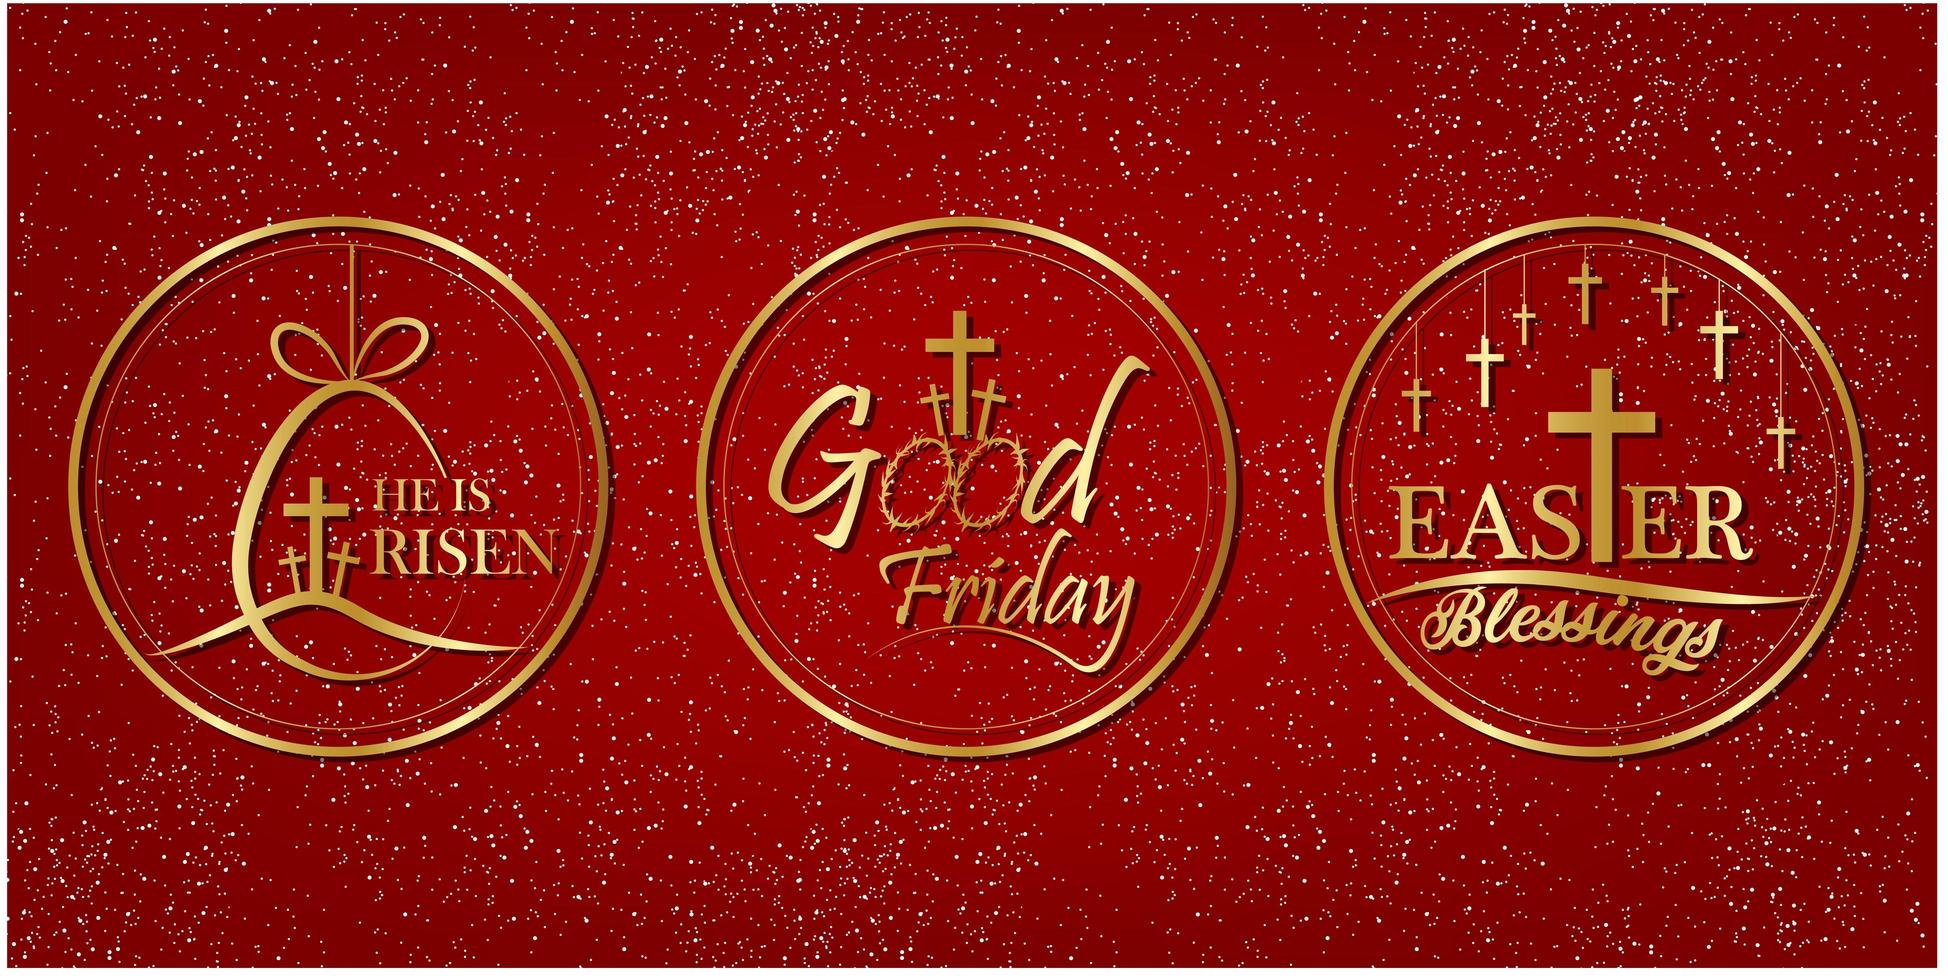 Good Friday label with gold style on red background. vector